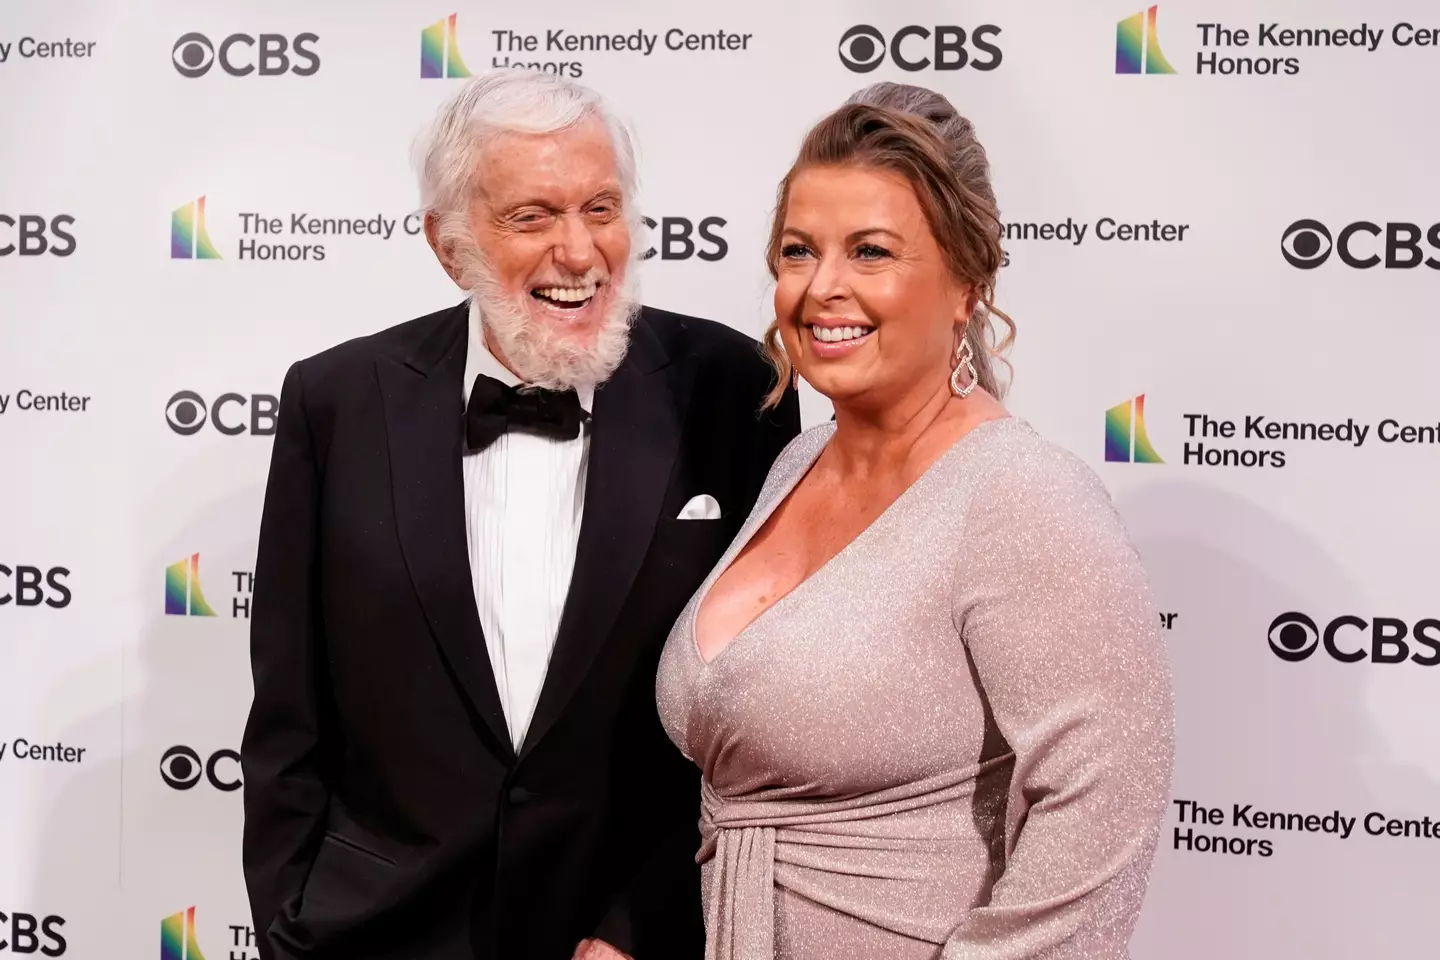 Dick Van Dyke and Arlene Silver at the 43rd Kennedy Center Honors.